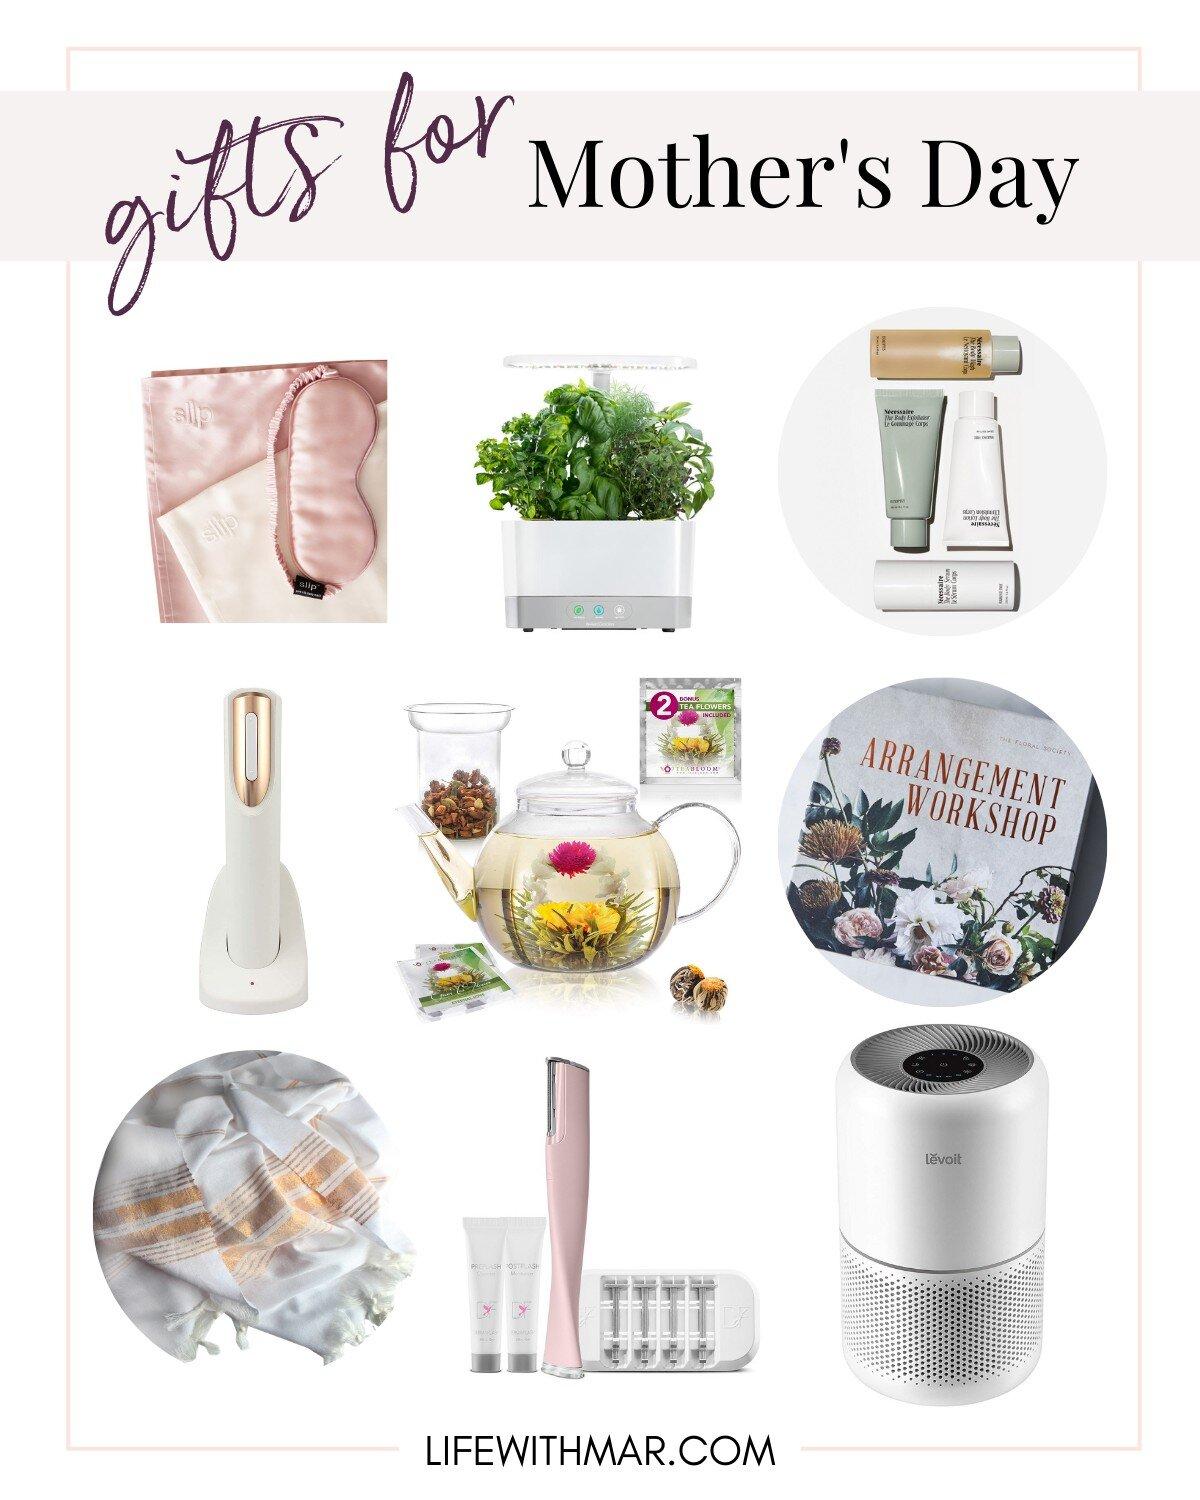 Looking for a Mother's Day gift?